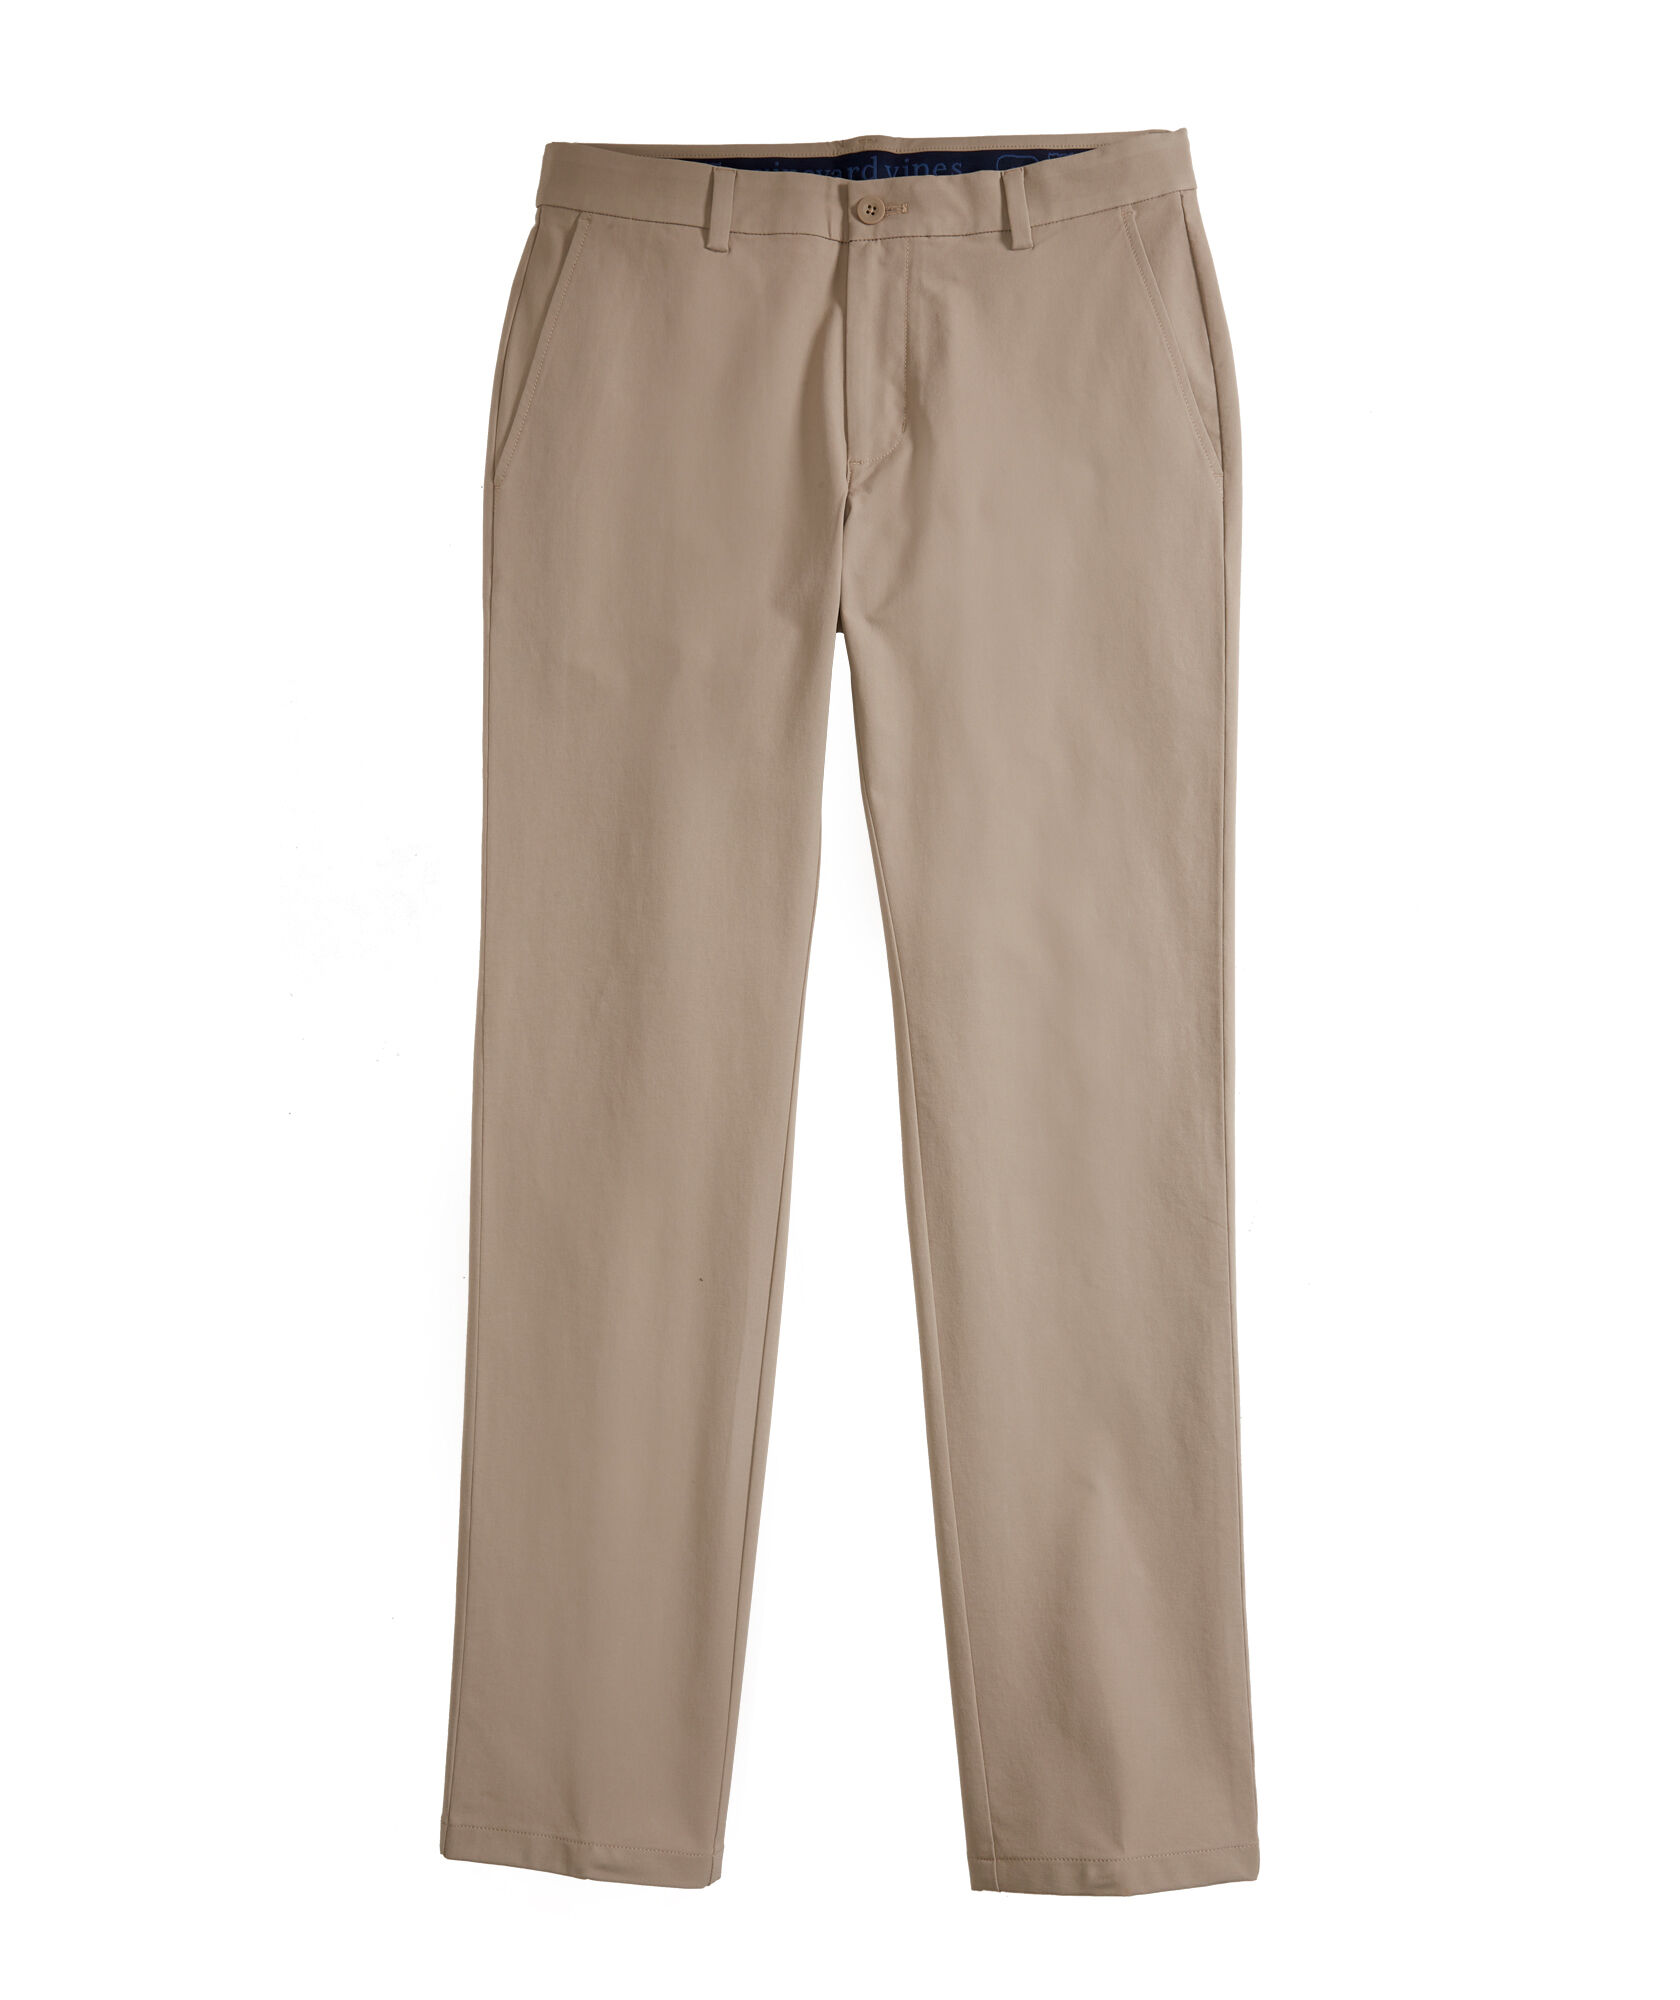 OUTLET Performance Pants